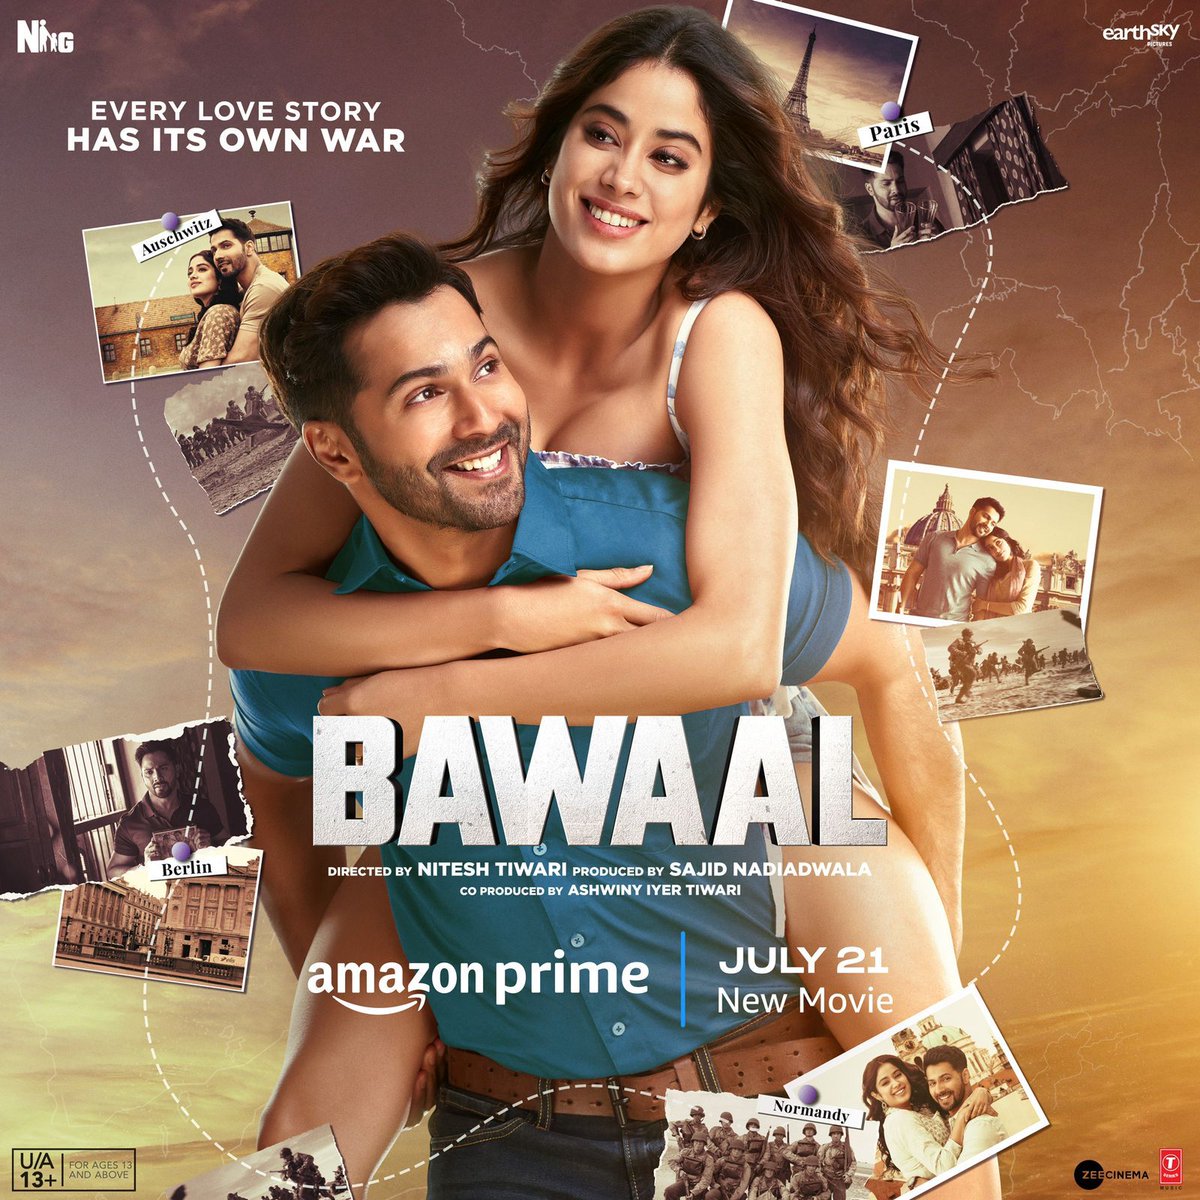 #Bawaal cements the position of #JahnviKapoor as an actress who can act & not just a pretty face. She looks confident in all the scenes & it feels like she is living the role. #VarunDhawan has displayed all his possible range. #BawaalOnPrime isn't a reincarnation drama.